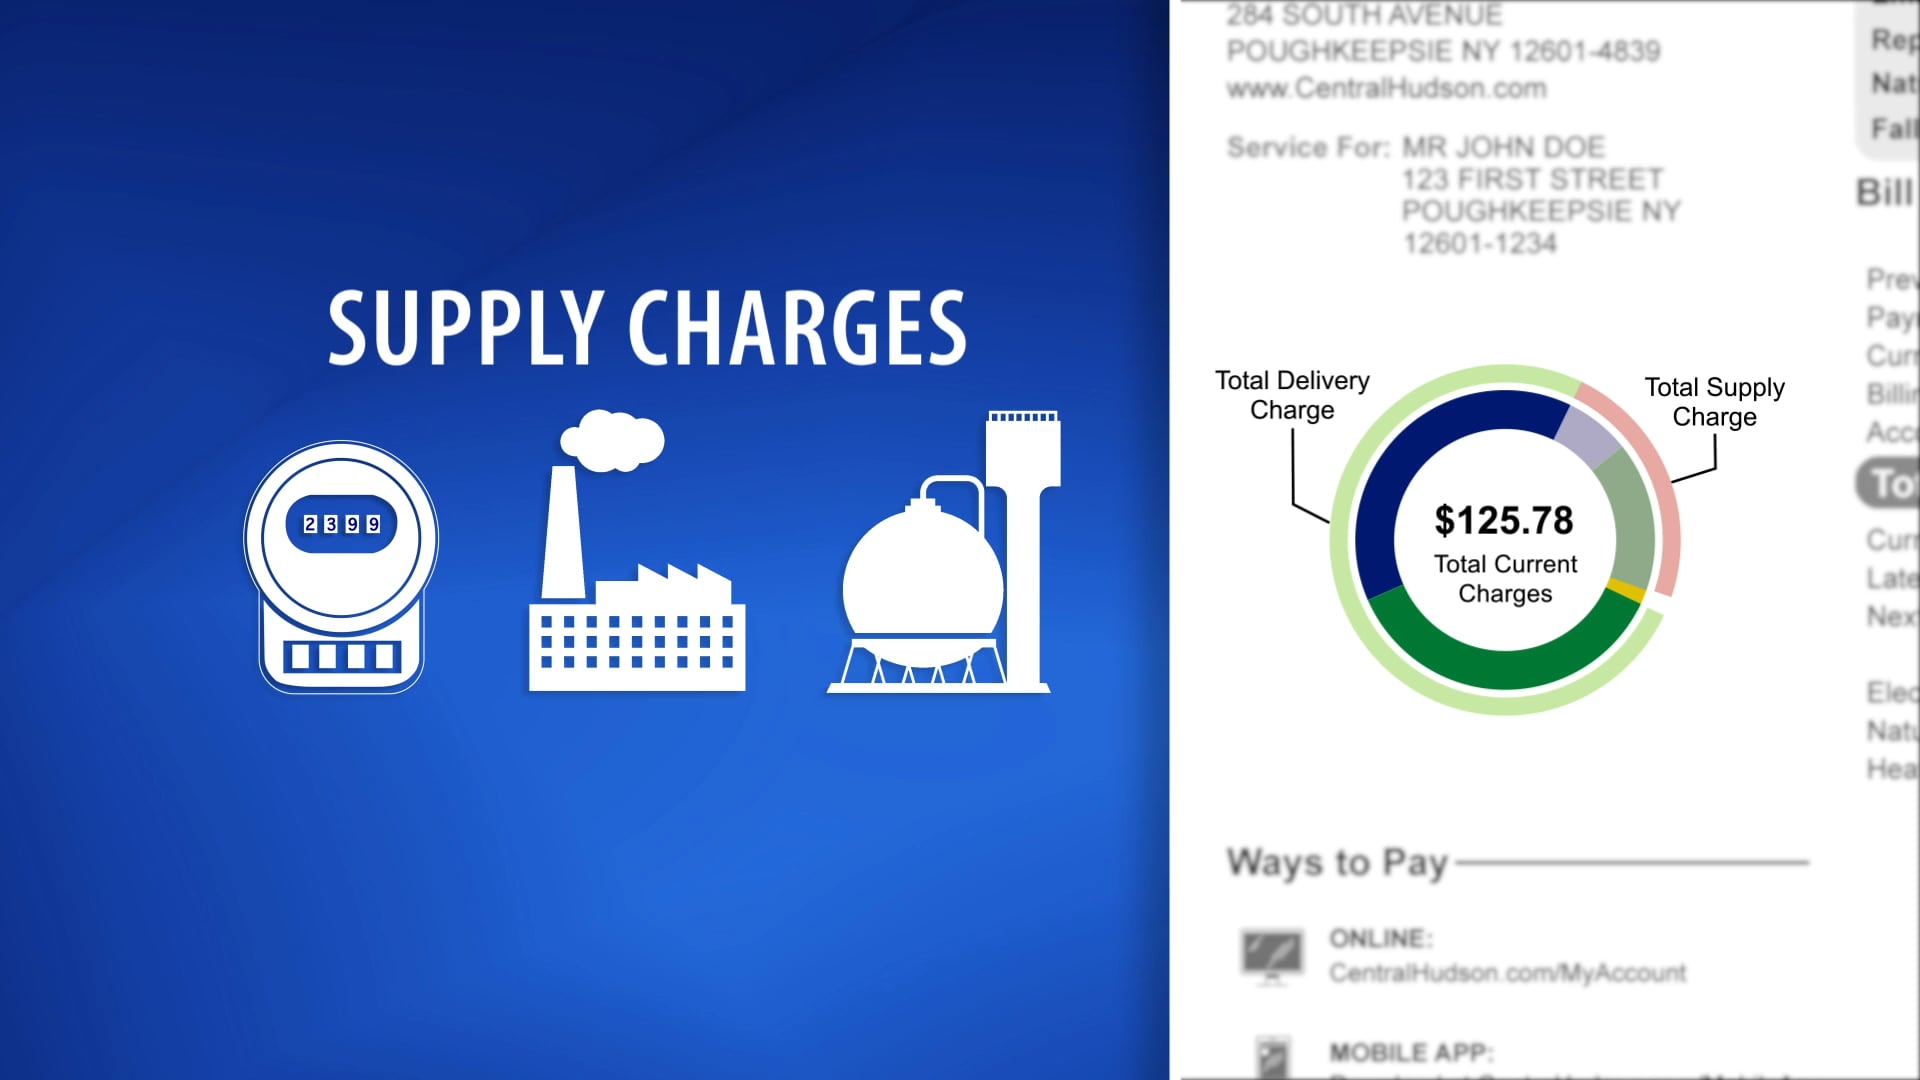 why-are-my-delivery-charges-higher-than-my-supply-charges-on-vimeo